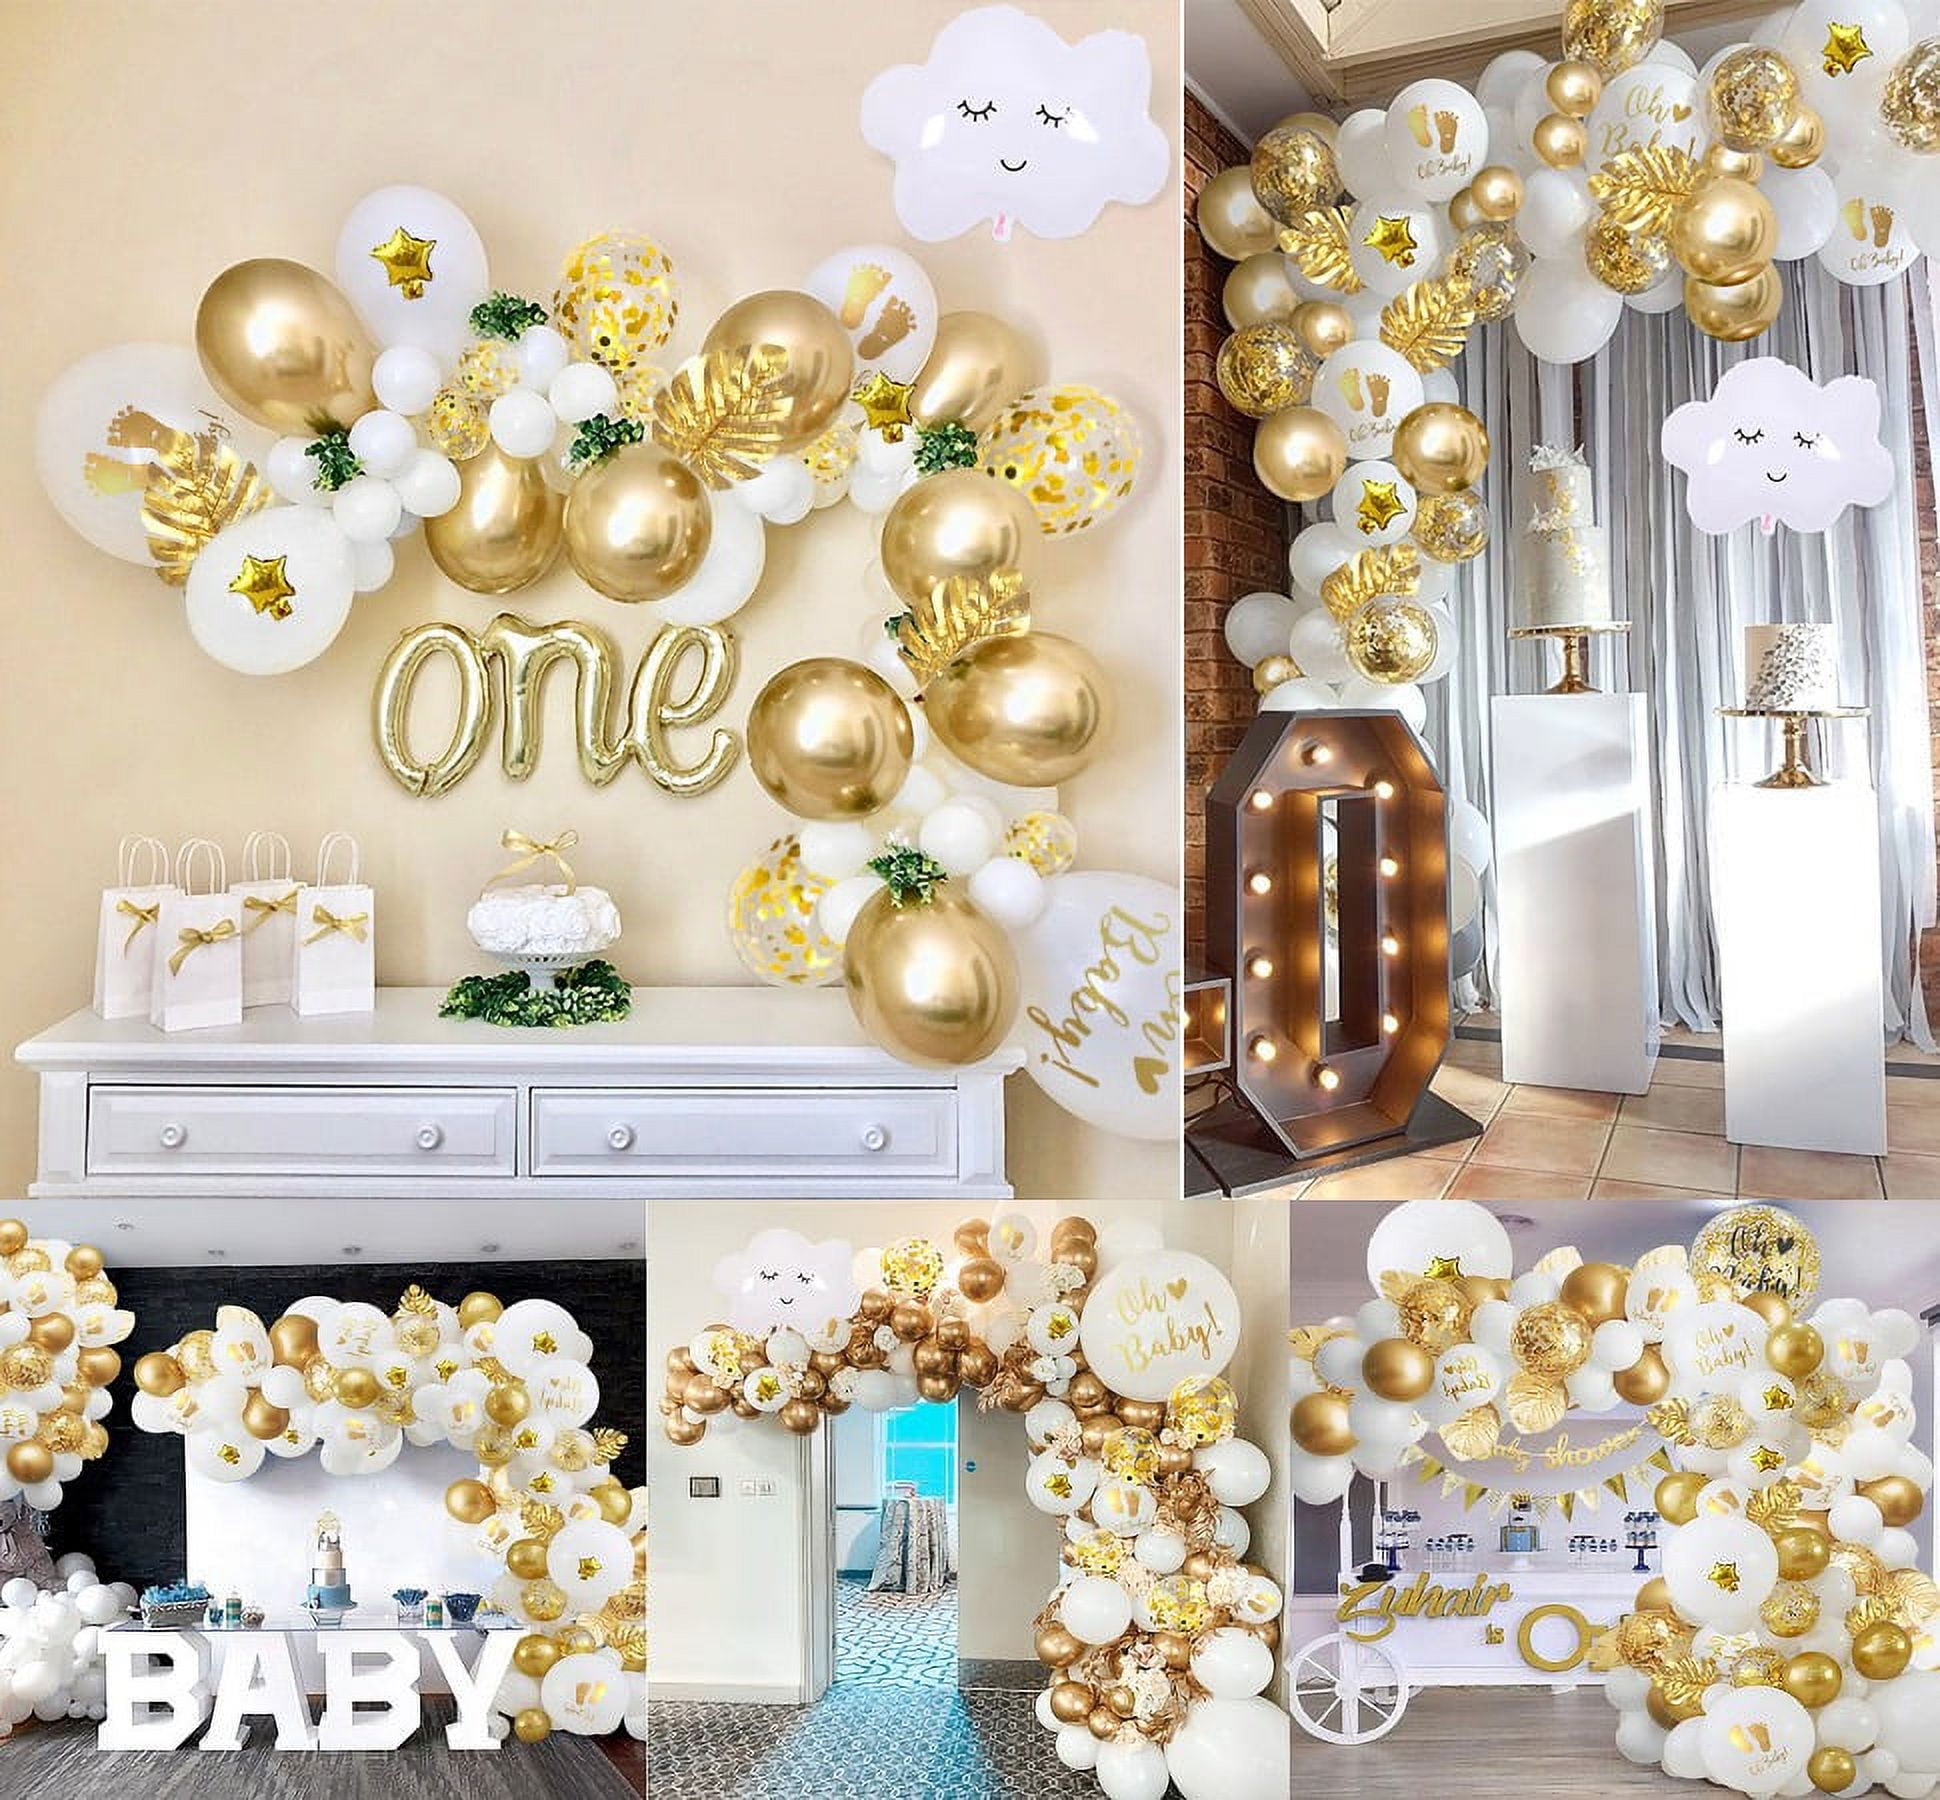 Set, Baby Shower Decorations, Golden Baby Shower Decorations For Boys Girls  Golden White Balloons Mummy To Be Sash Cake Topper Banner For Baby Shower